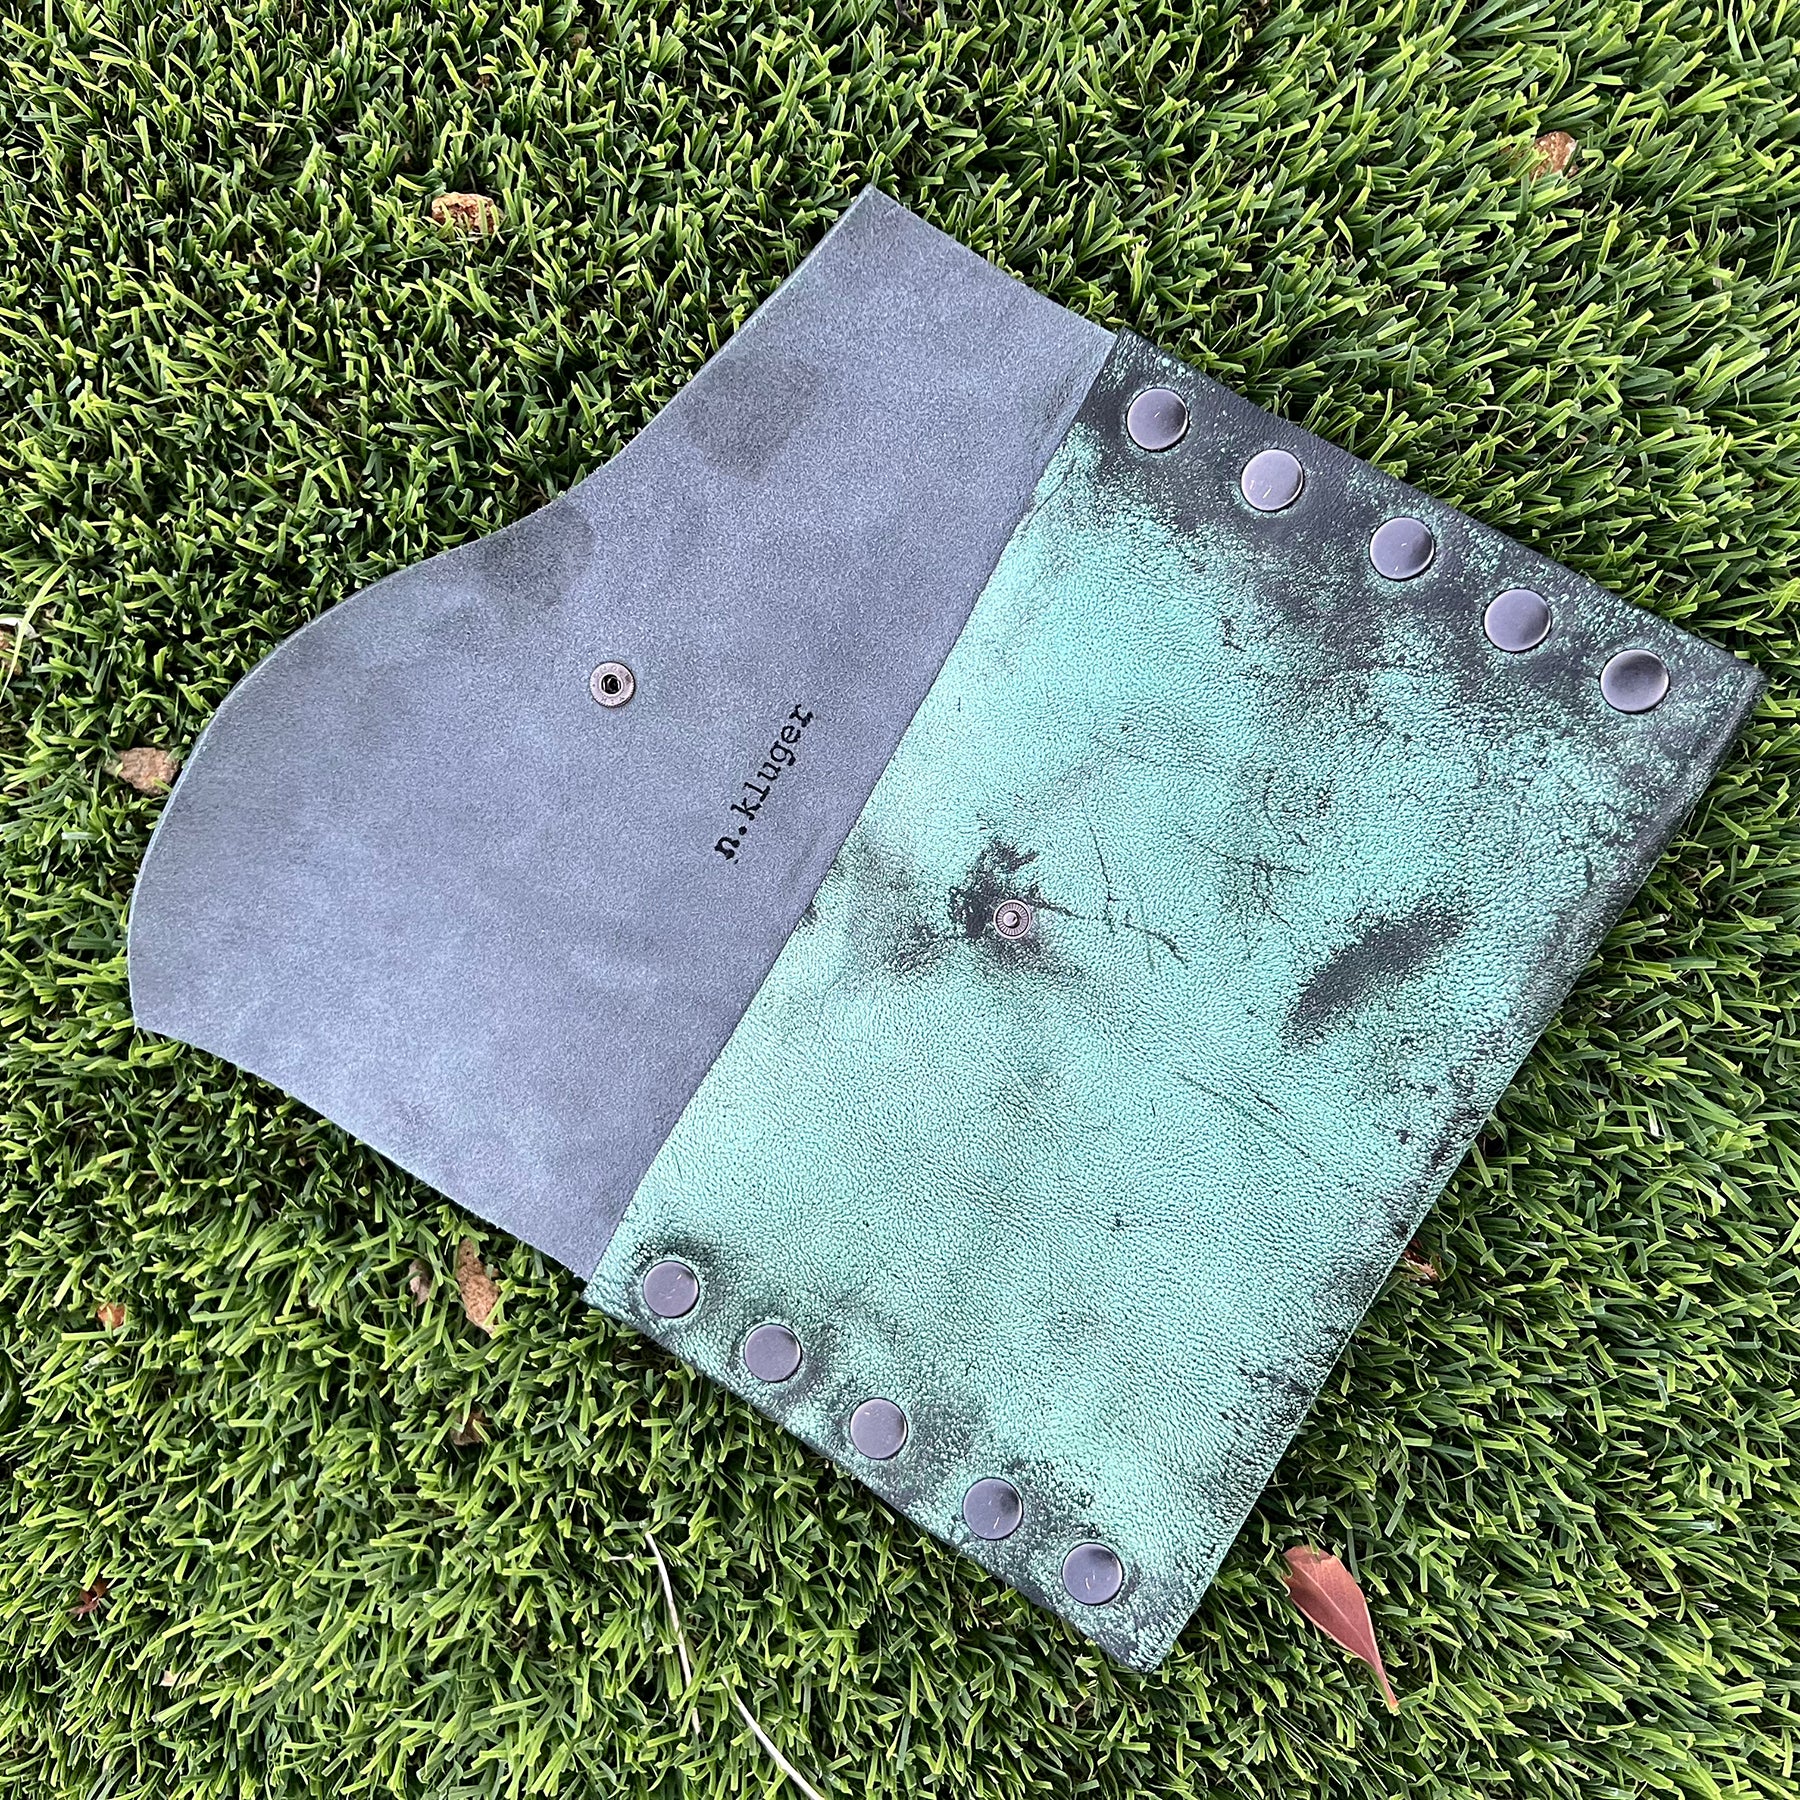 Distressed Vintage Green Leather Snap Clutch